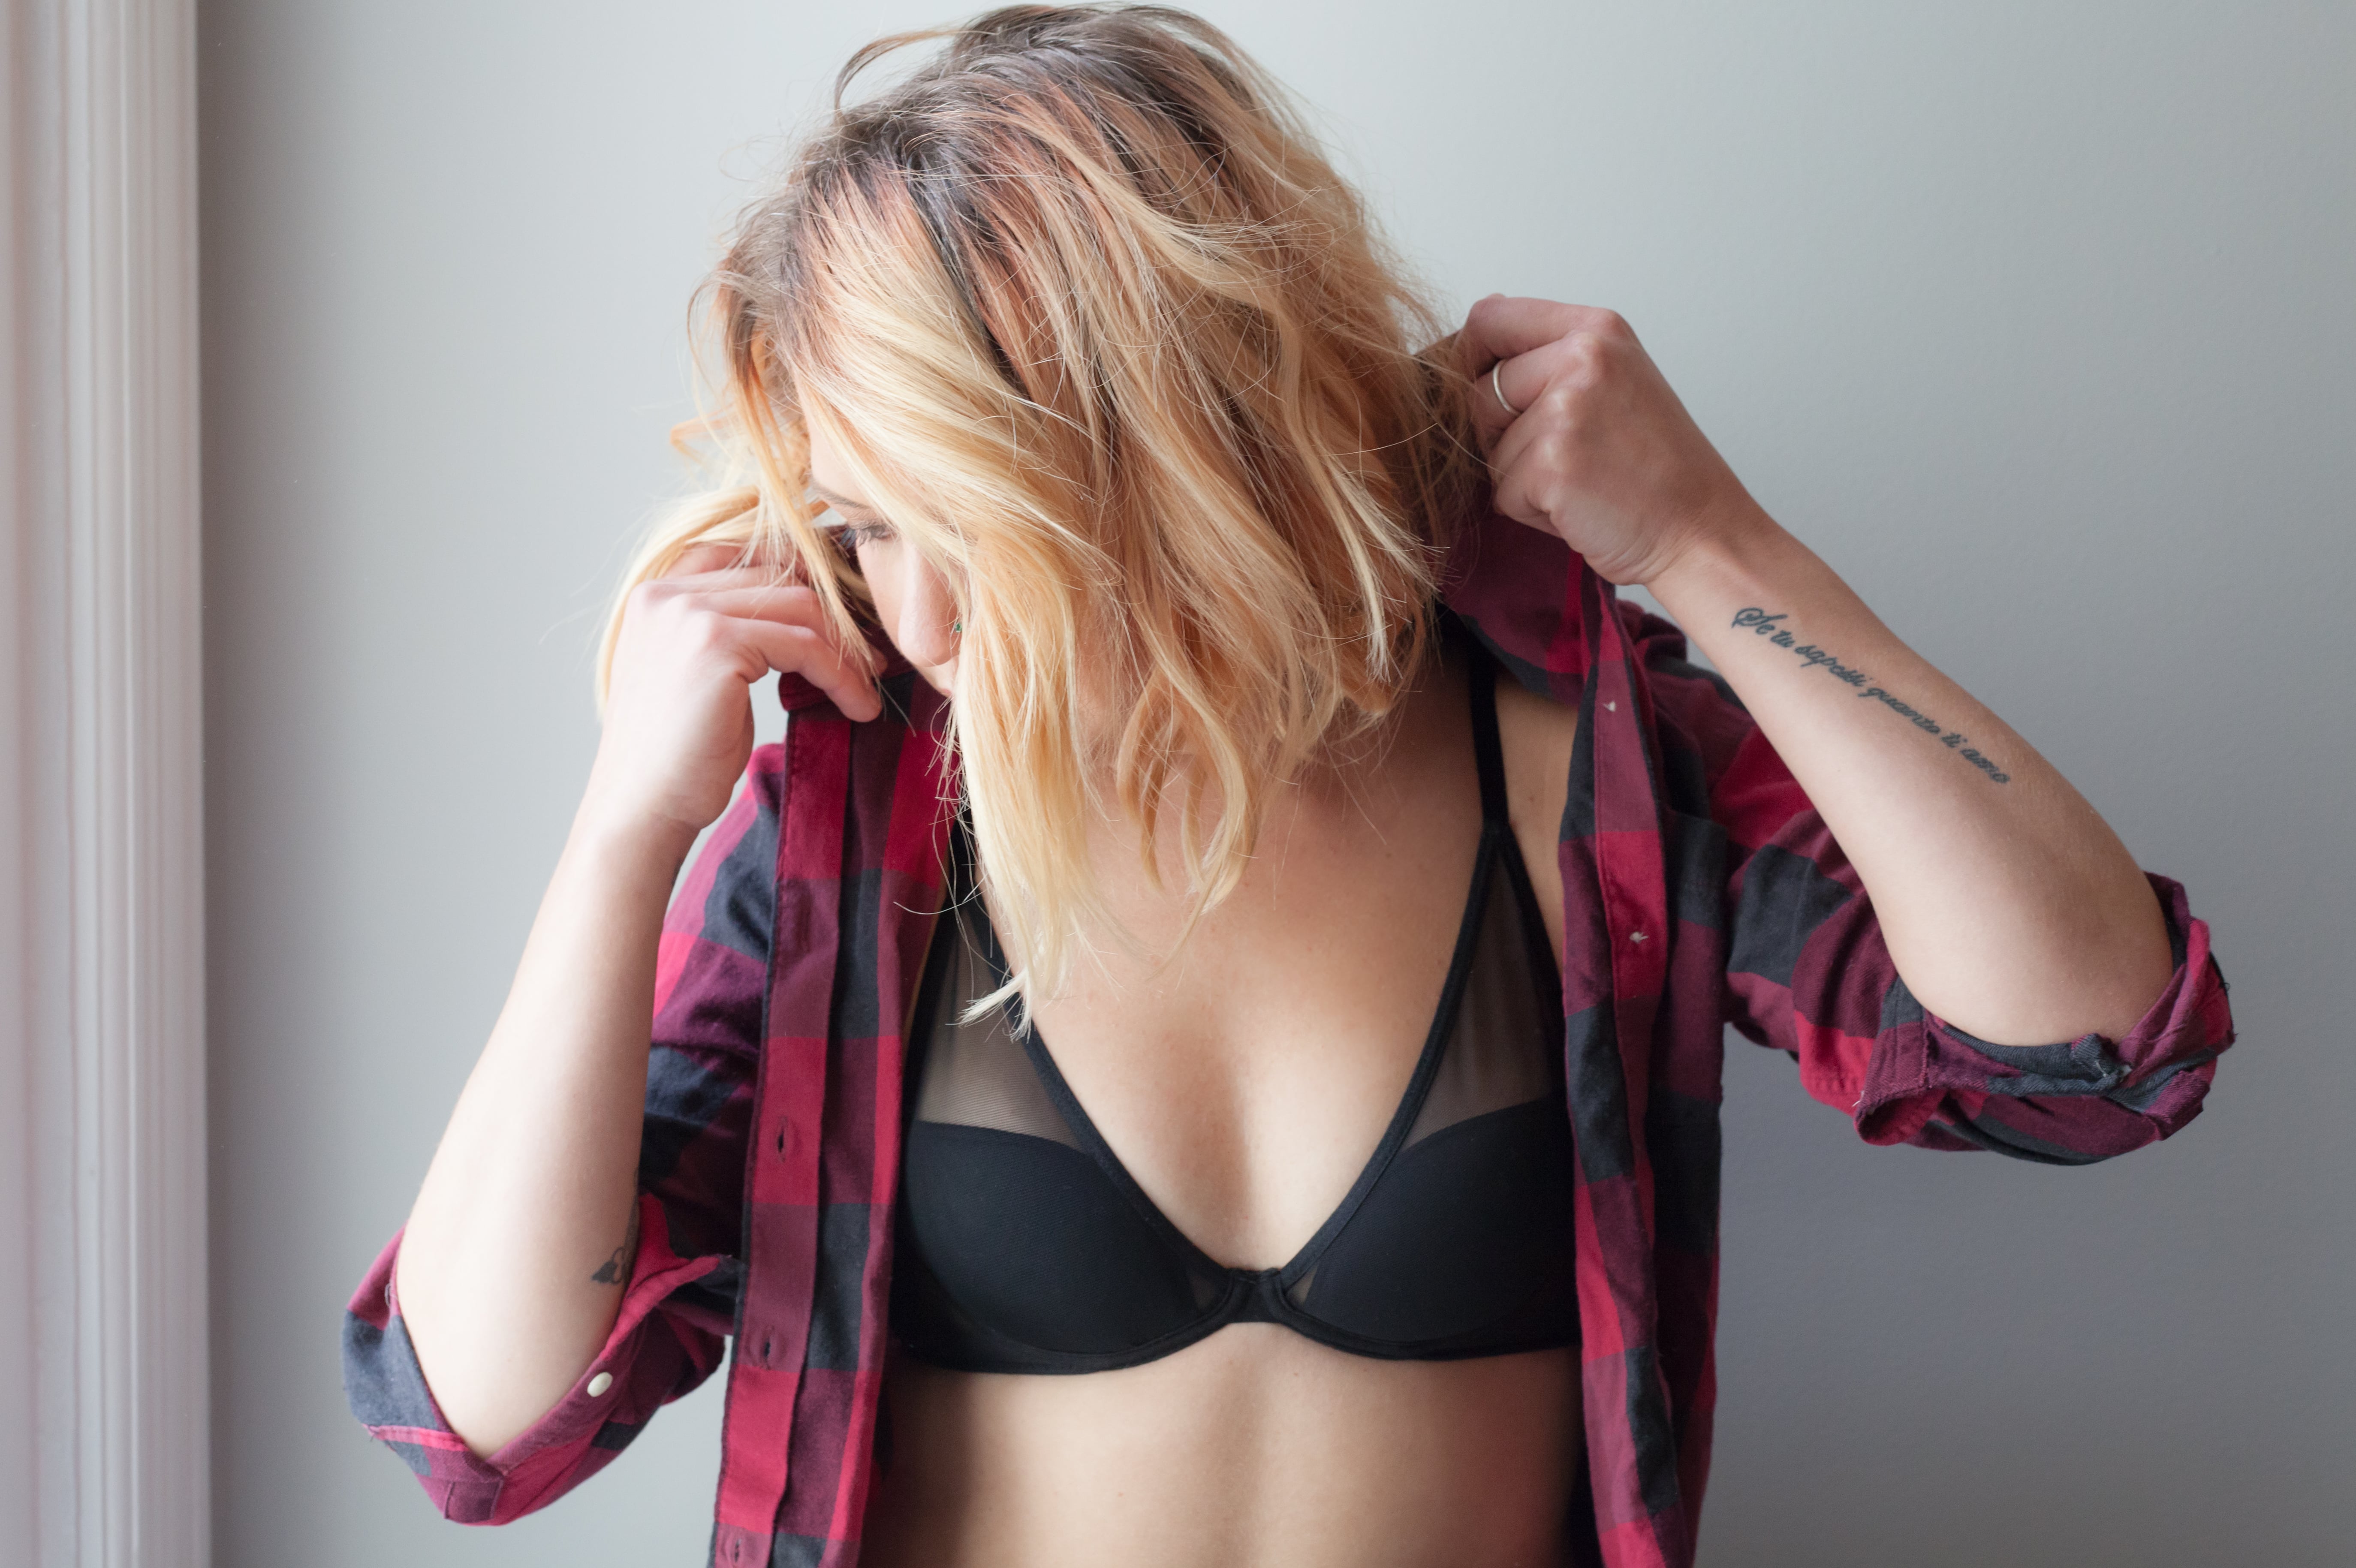 Meet Pepper, the New Bra Company for Small Breast Sizes